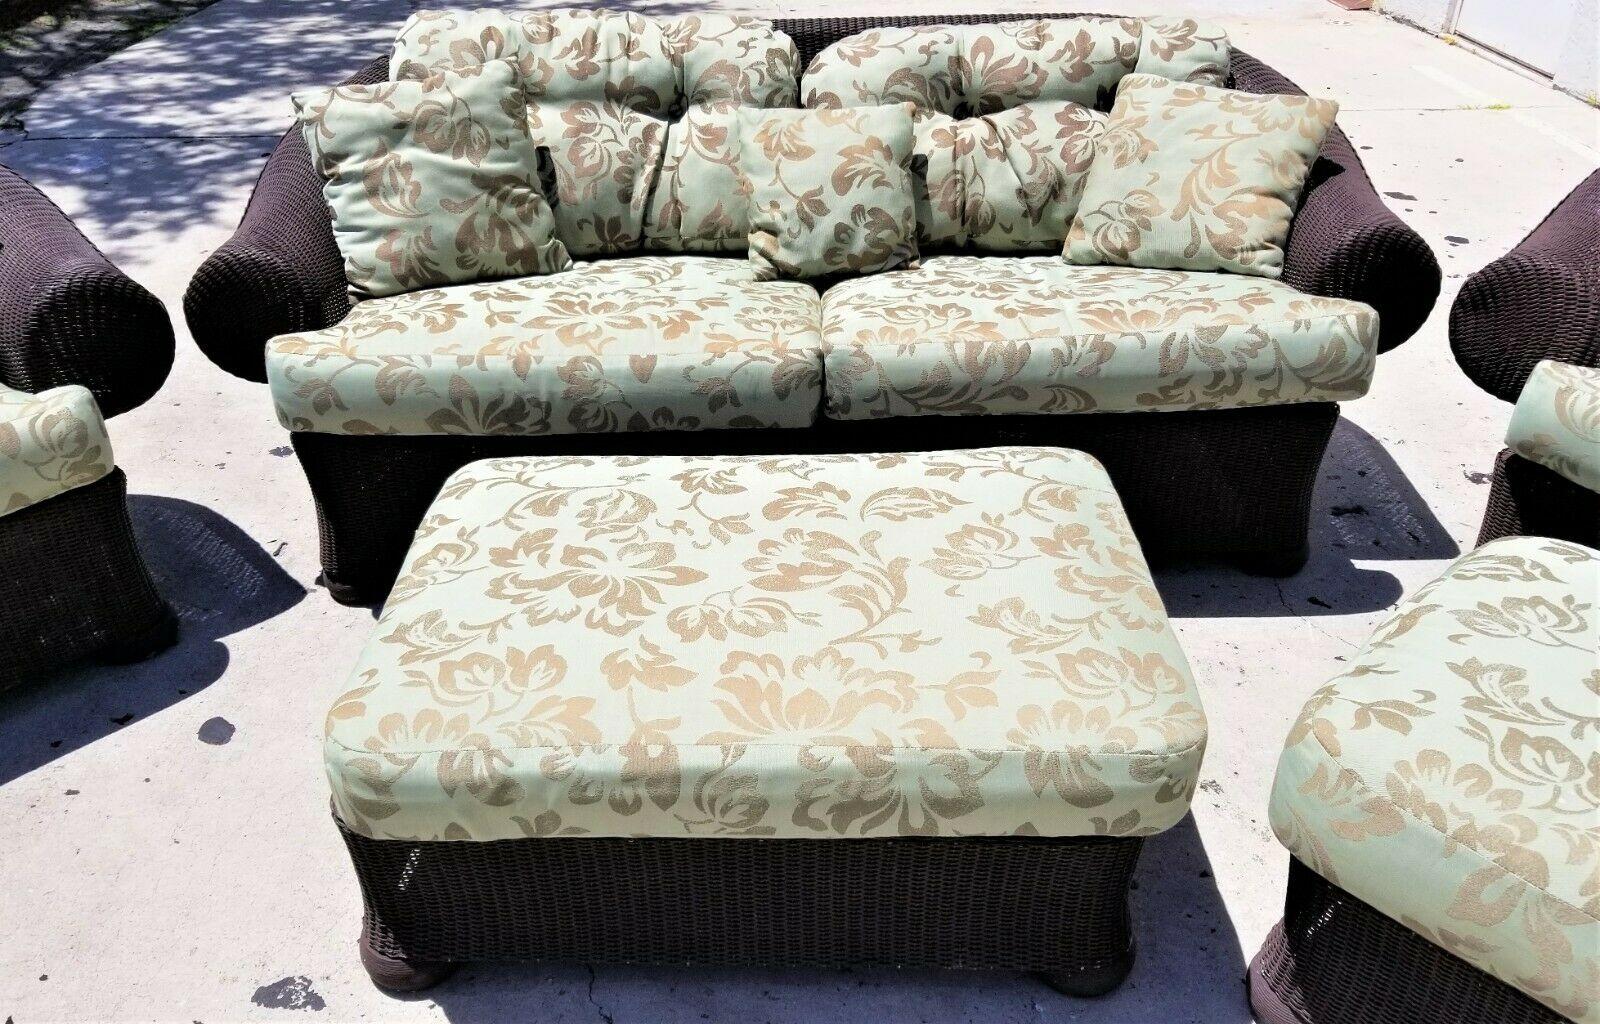 Offering One Of Our Recent Palm Beach Estate Fine Furniture Acquisitions Of A
5 Piece Set Lloyd Flanders Loom Wicker Weather Resistant sofa chairs ottomans

We have many other similarly styled furniture listed including a Set of 4 LLOYD LOOM